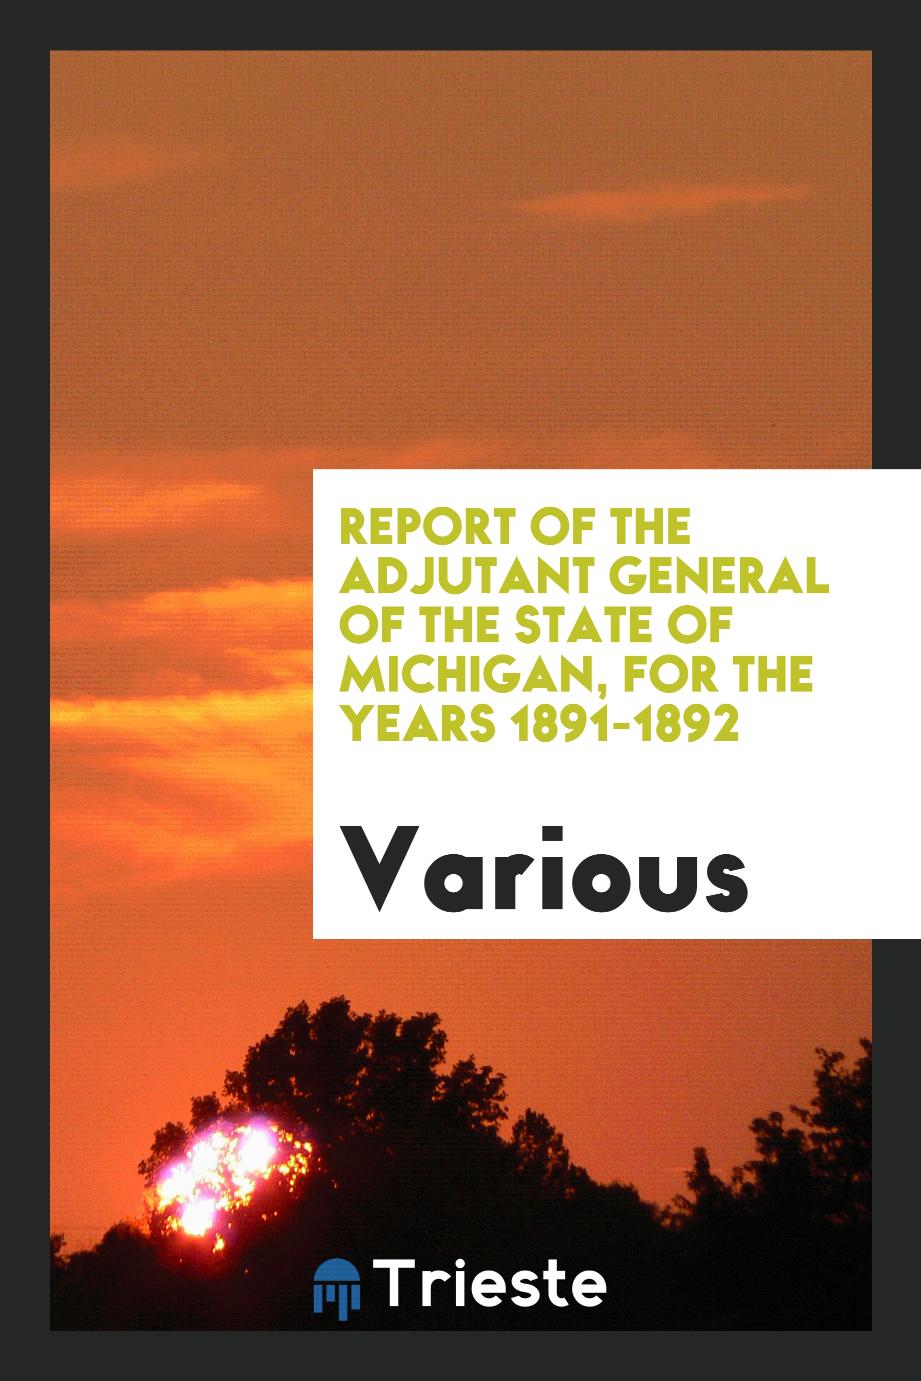 Report of the Adjutant General of the state of Michigan, for the years 1891-1892